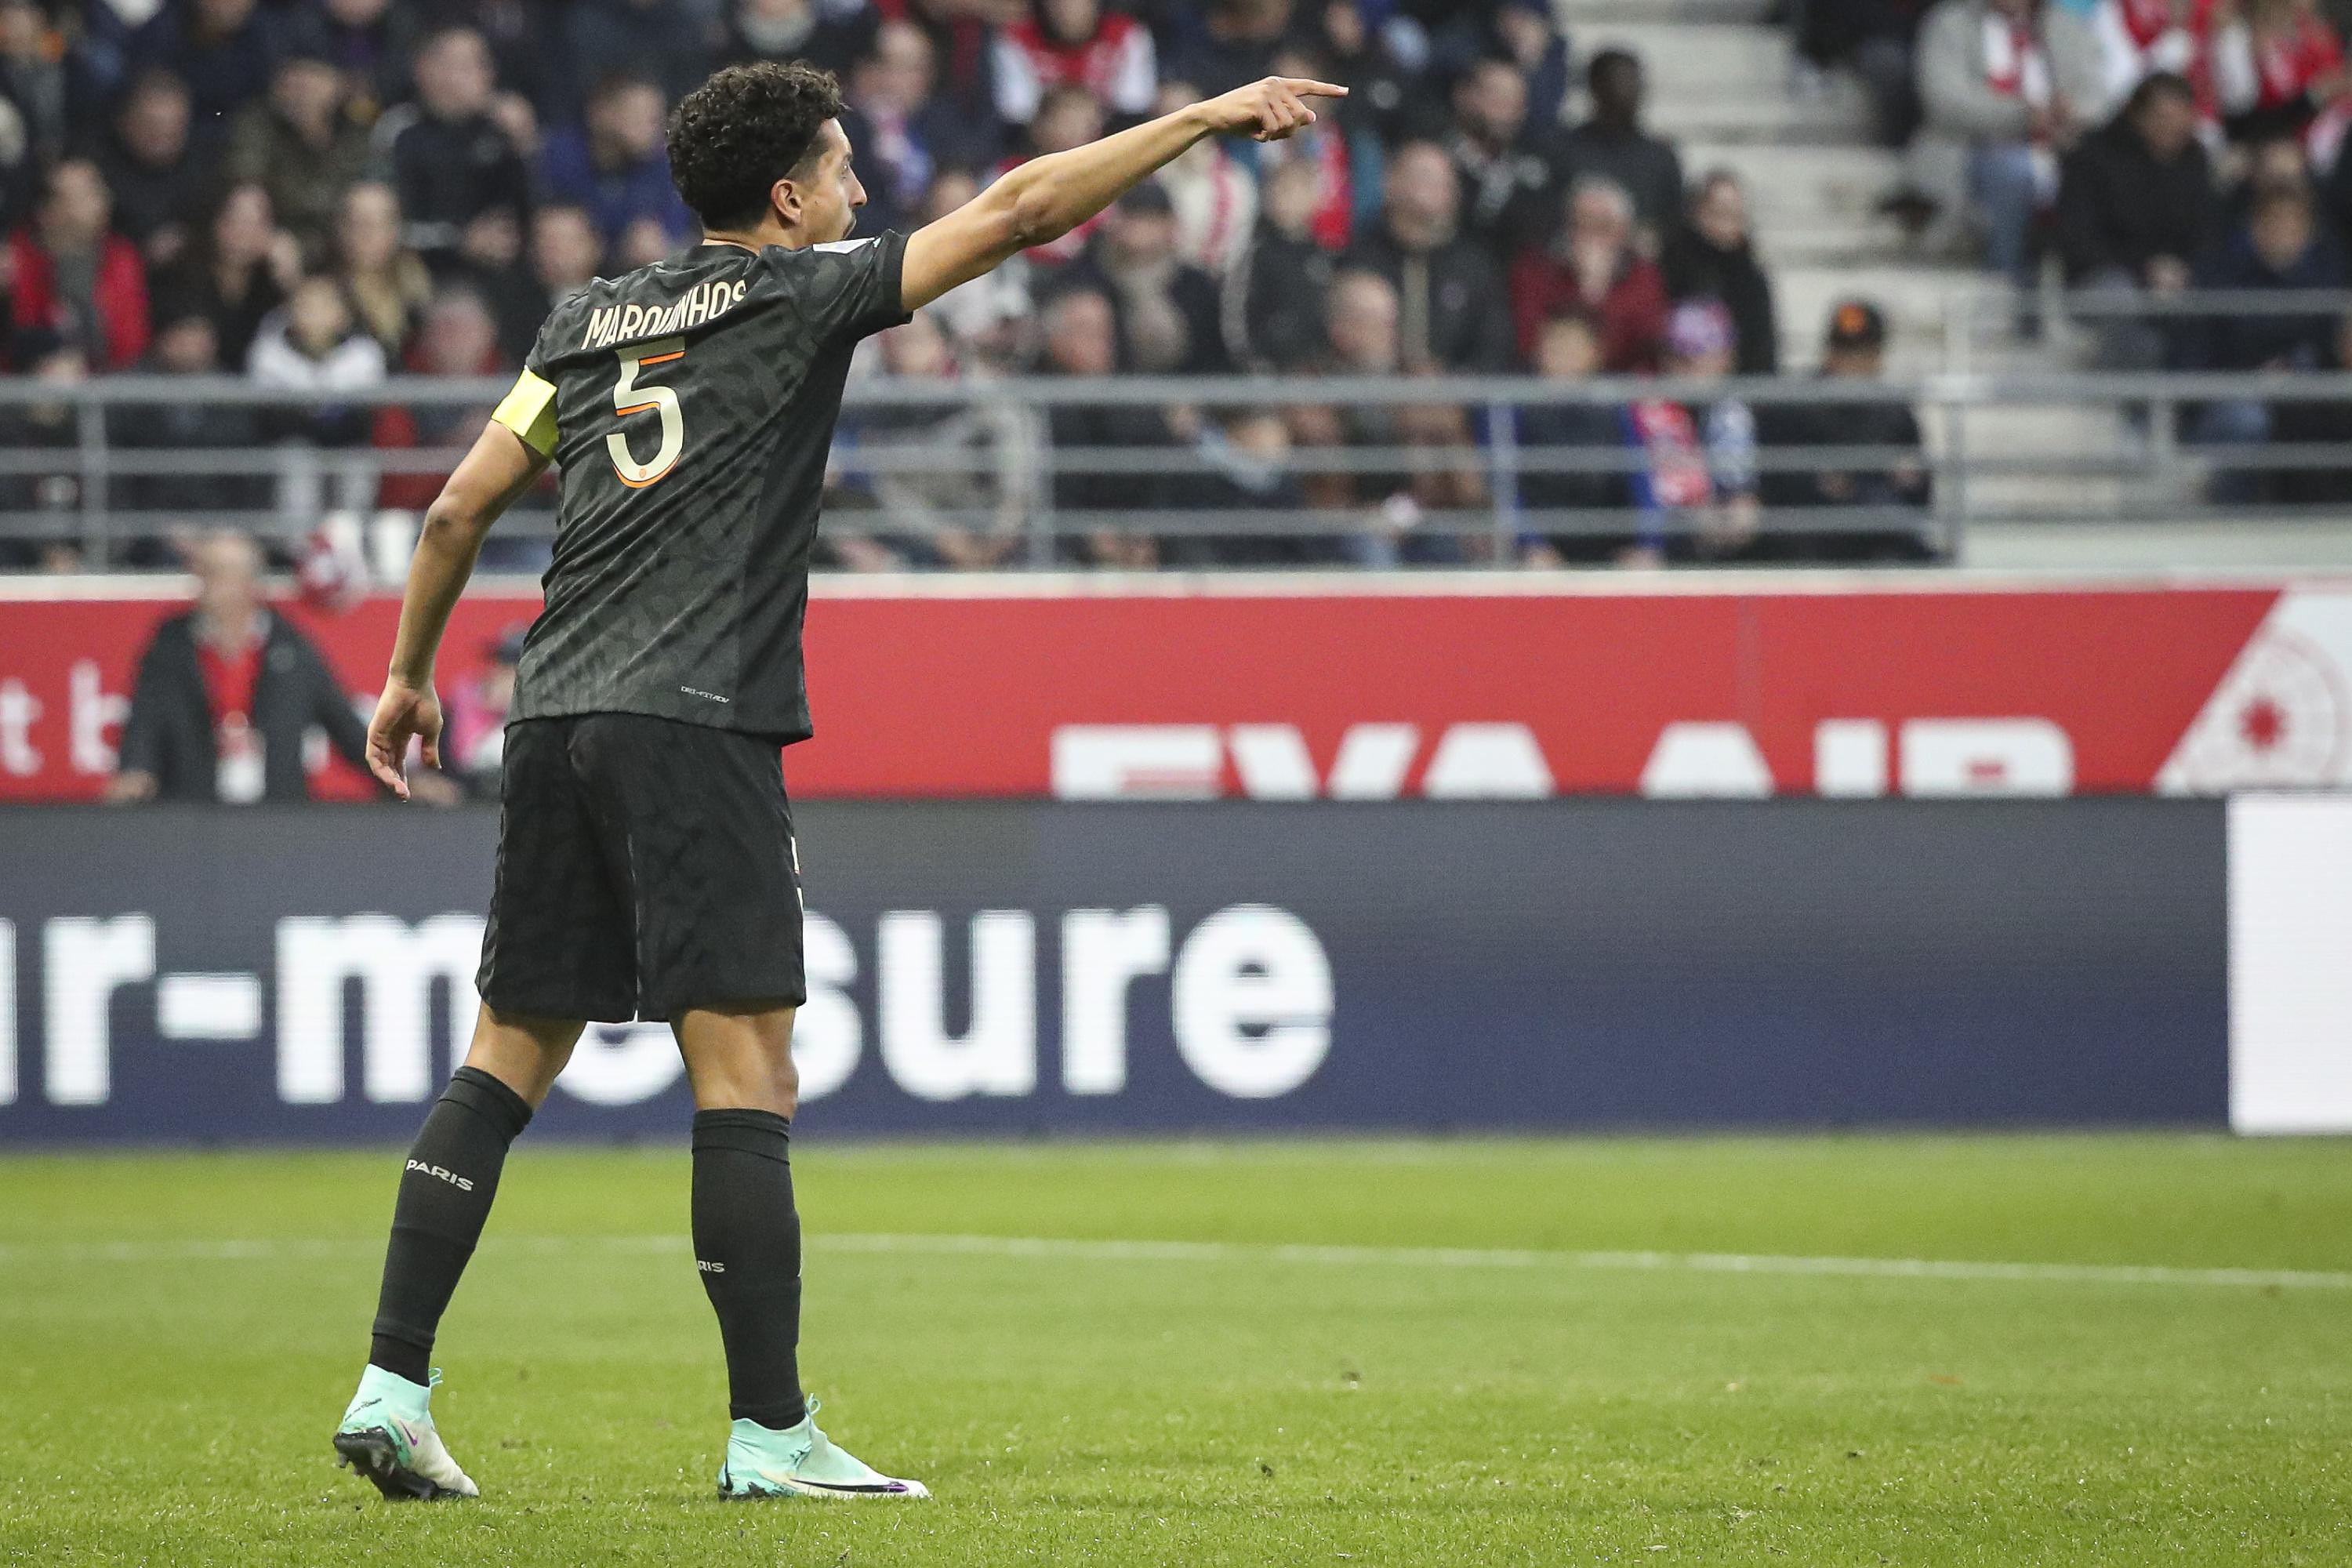 PSG: “I don’t see myself finishing my career anywhere” other than Paris, assures Marquinhos